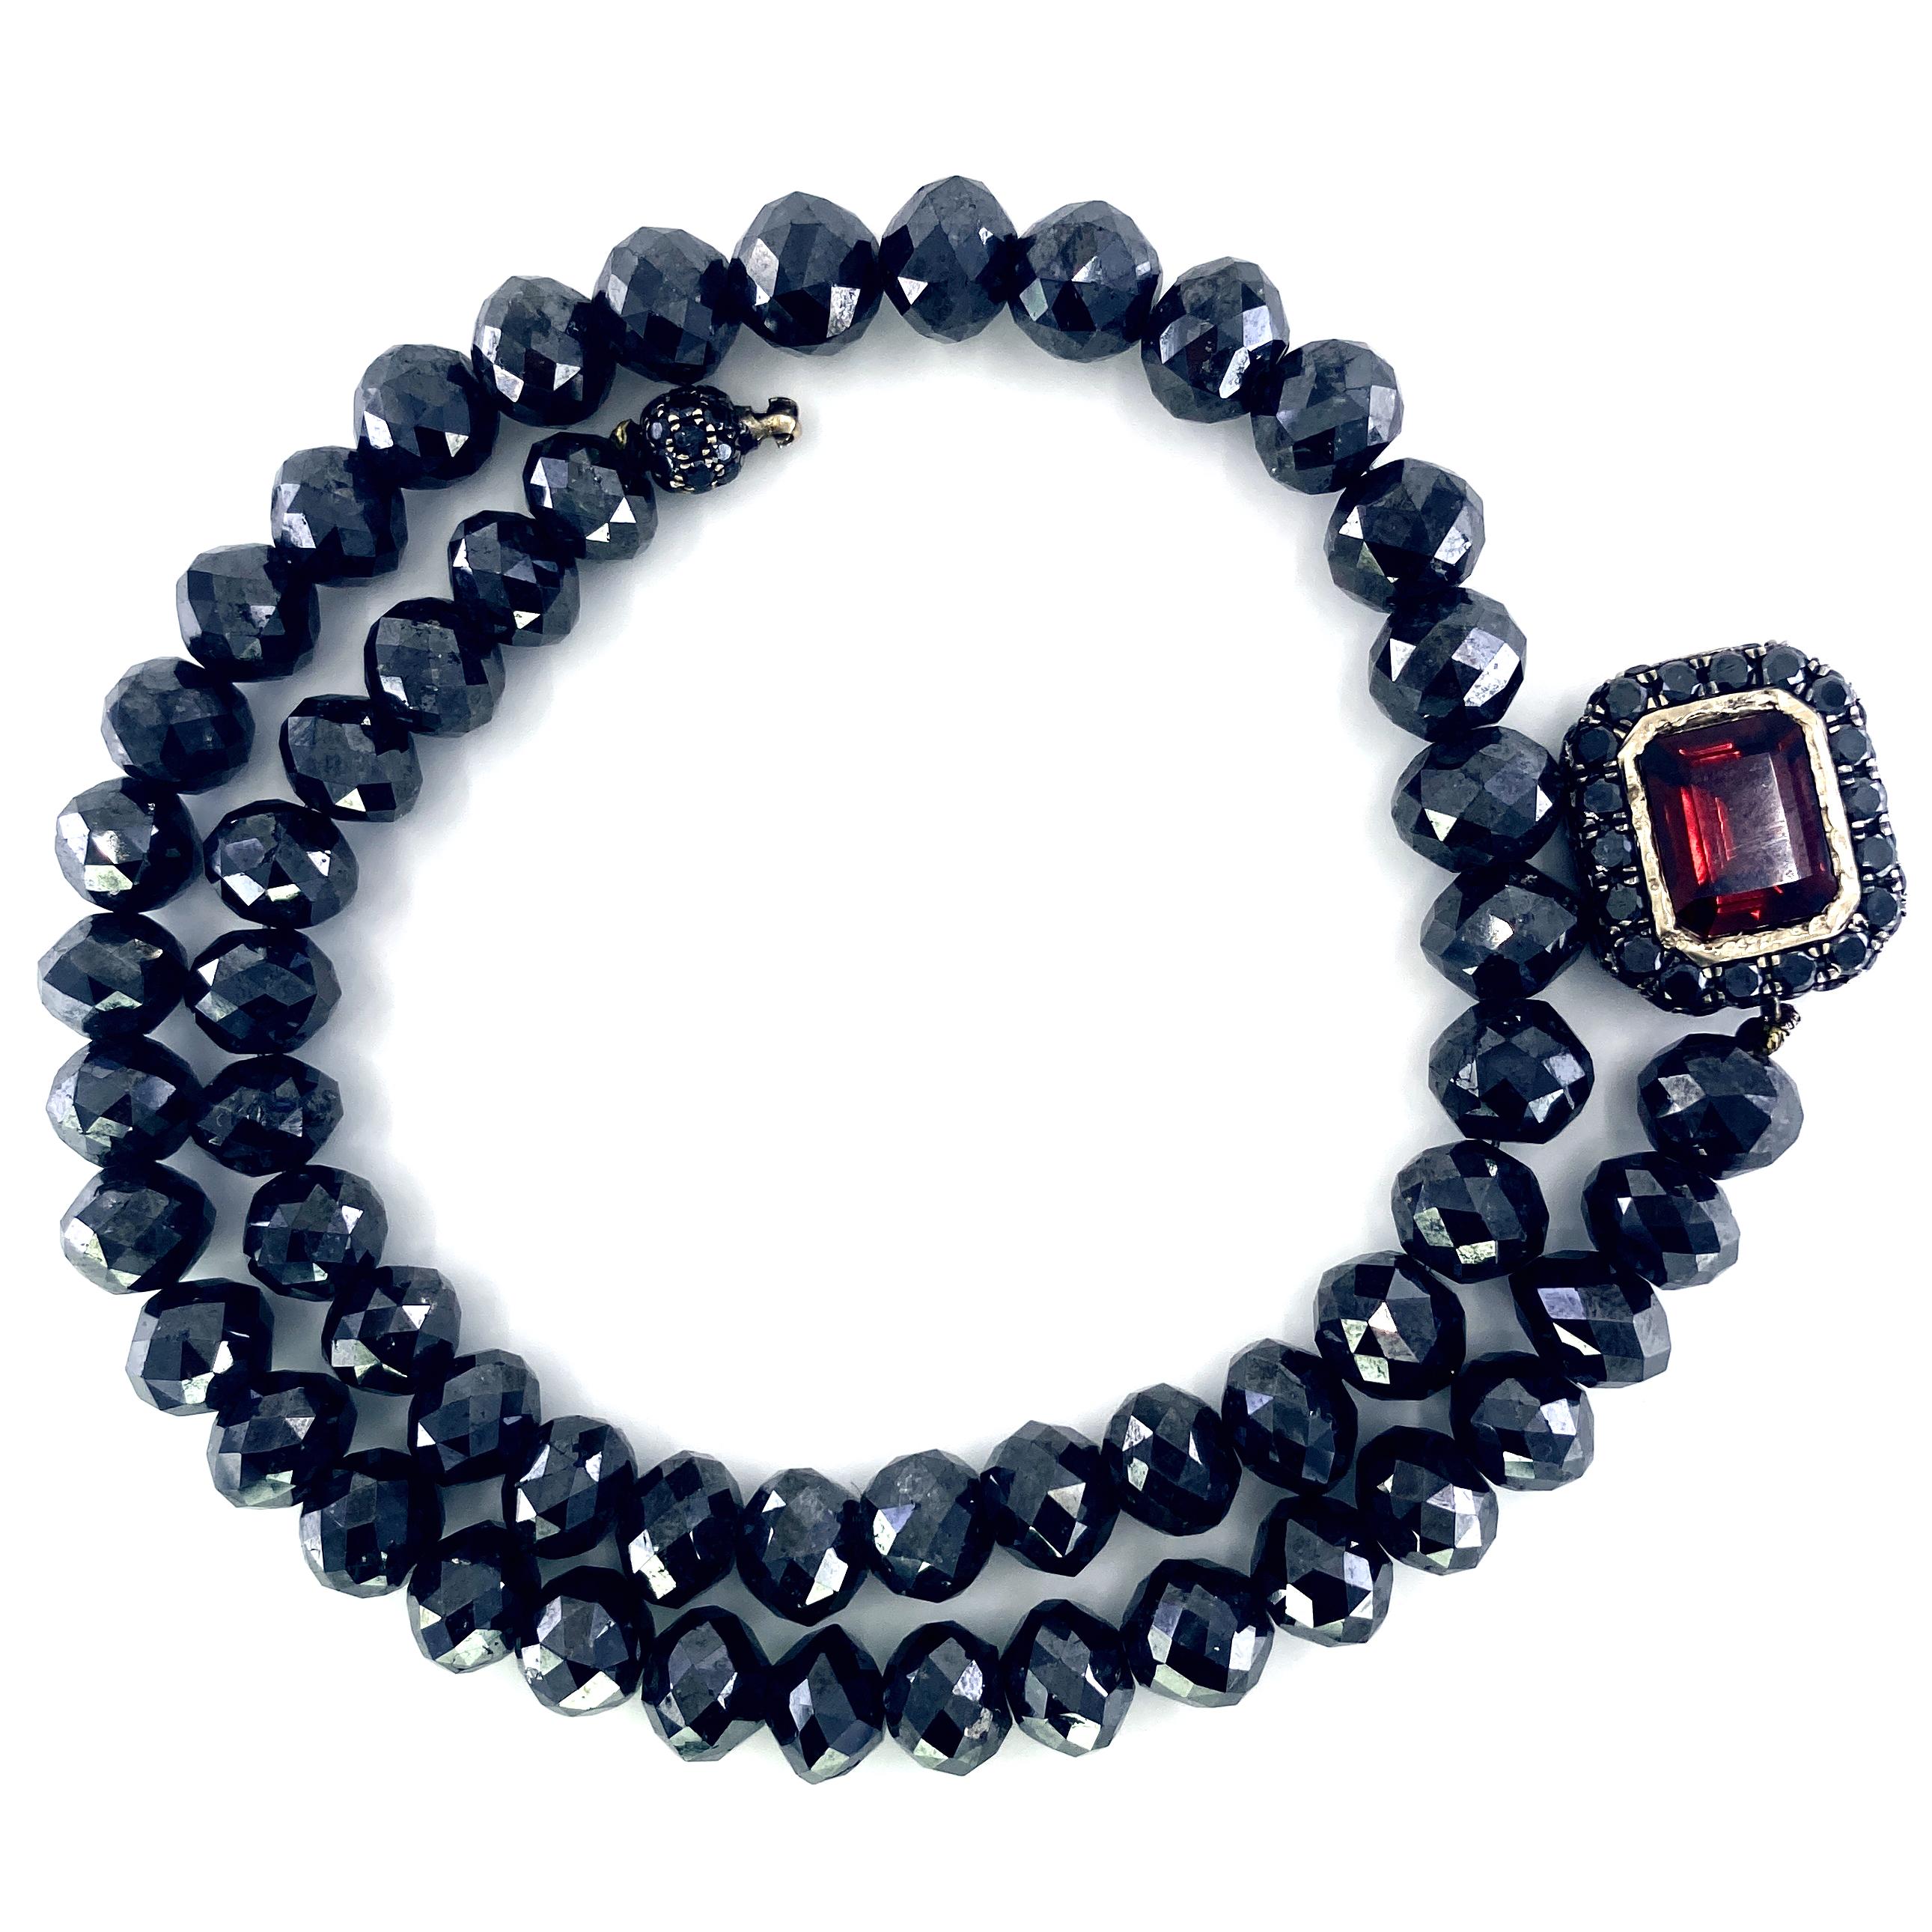 250 Carat Black Diamond Bead Choker Necklace with Garnet Clasp in 18 Karat Gold In New Condition For Sale In Sherman Oaks, CA